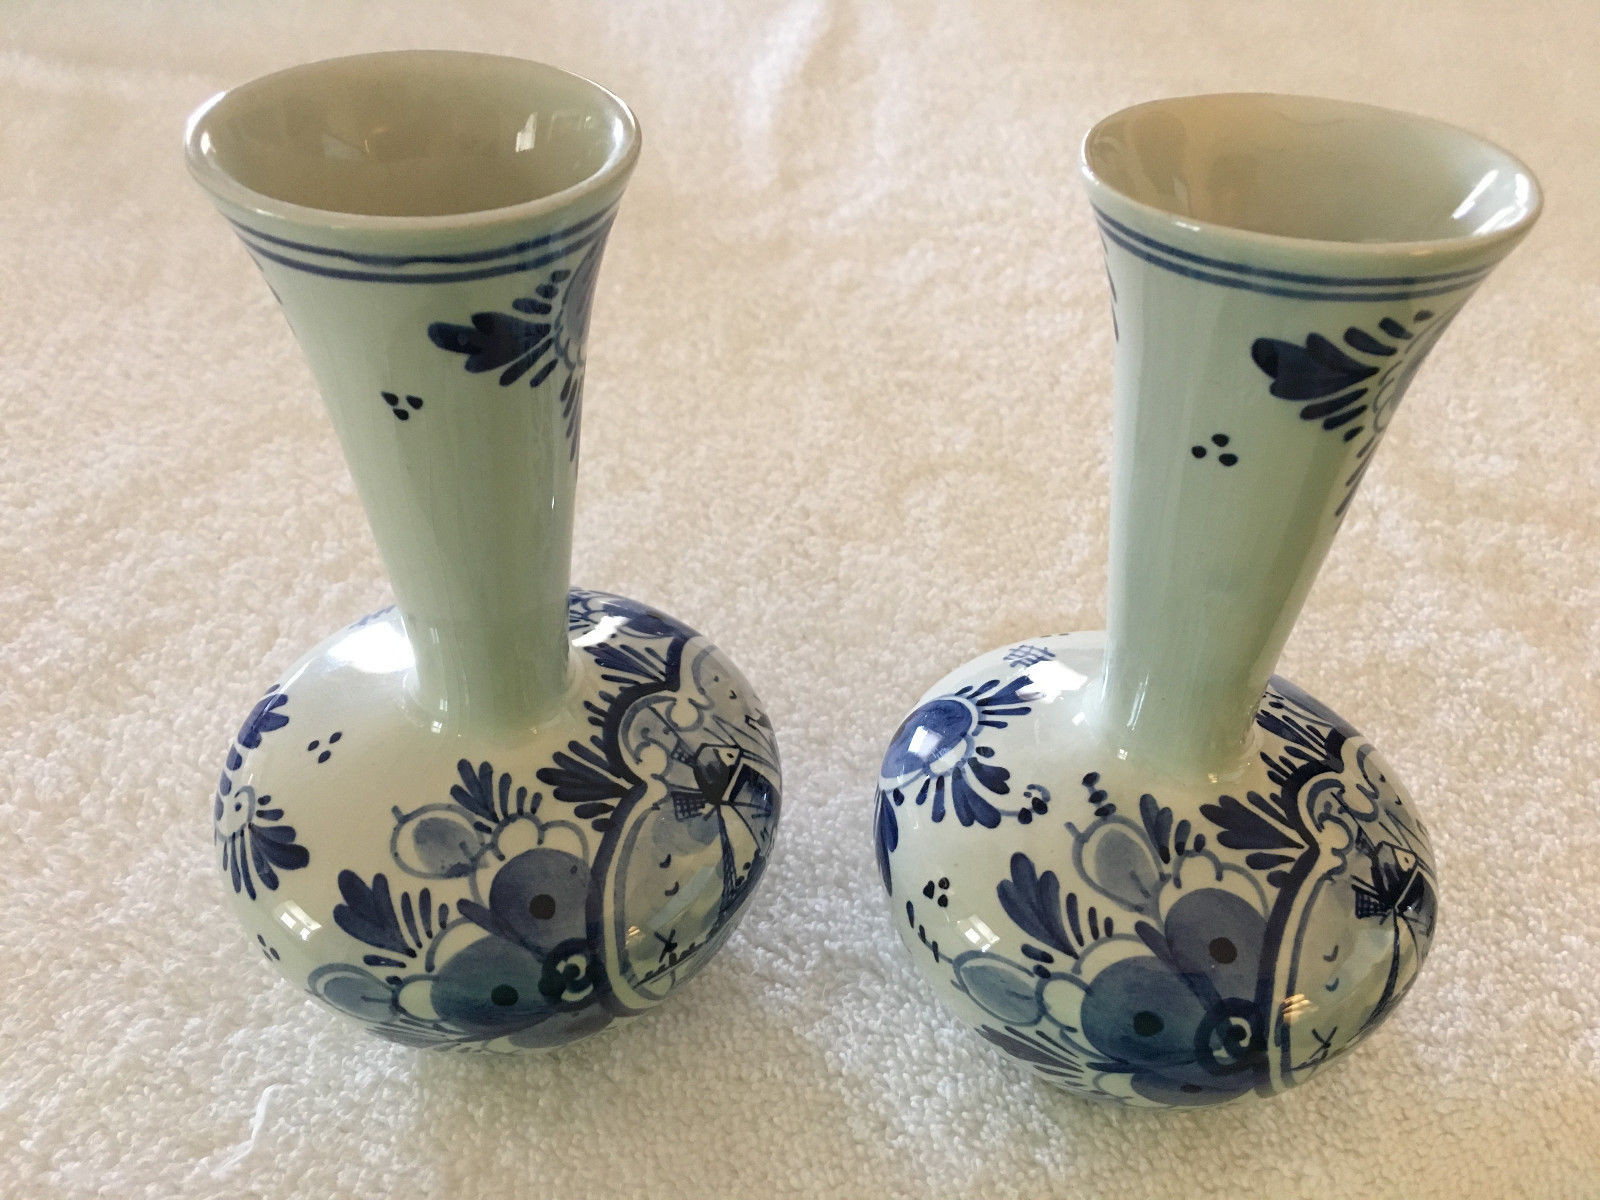 delft vase value of vintage pair of delft blue hand painted 6 bud vase made in holland in vintage pair of delft blue hand painted 6 bud vase made in holland 1 of 12 vintage pair of delft